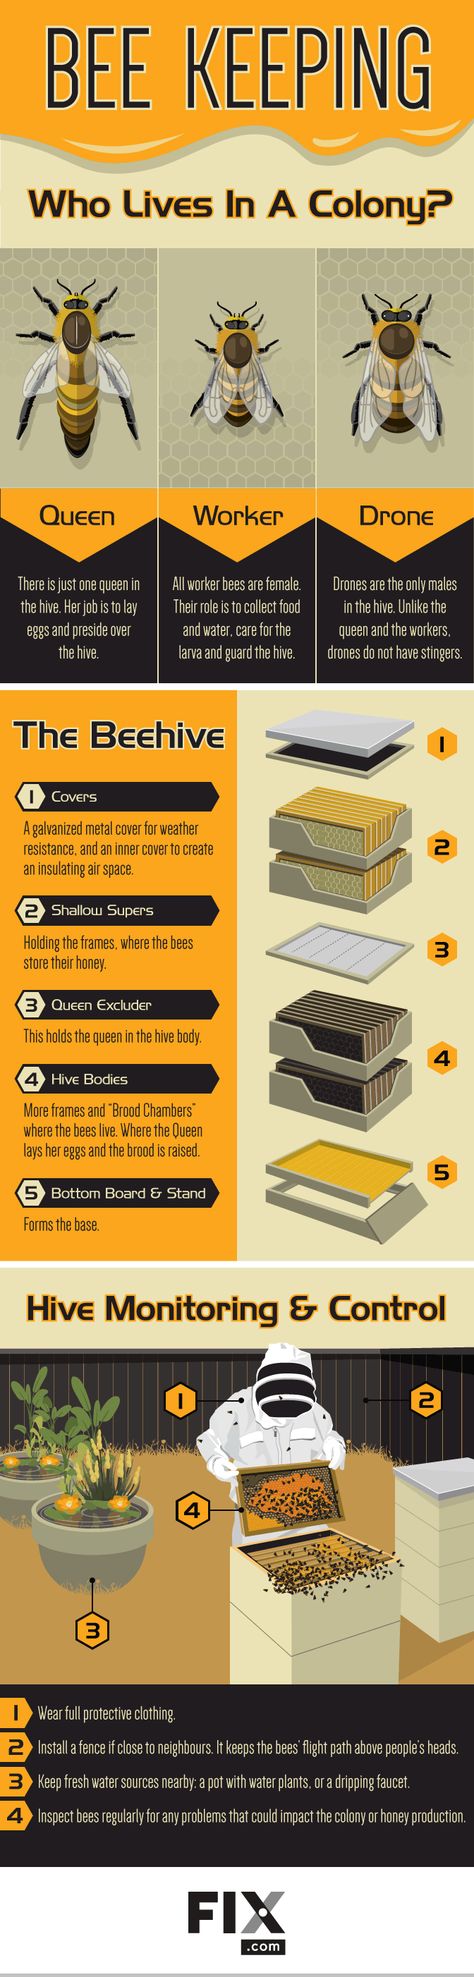 bee keeping infographic